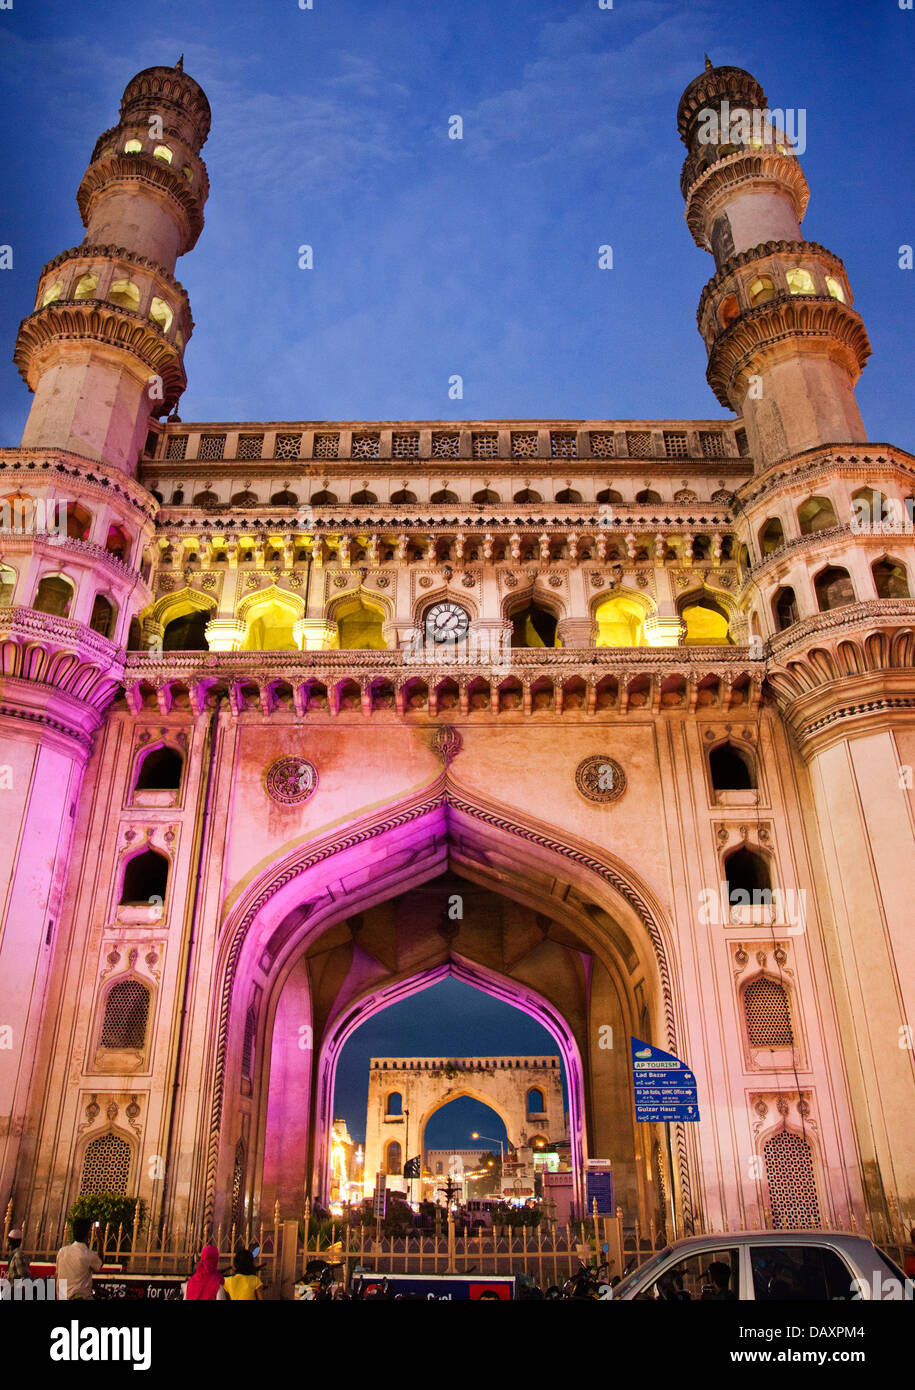 Low angle view of a Mosque, Charminar, Hyderabad, Andhra Pradesh, Inde Banque D'Images